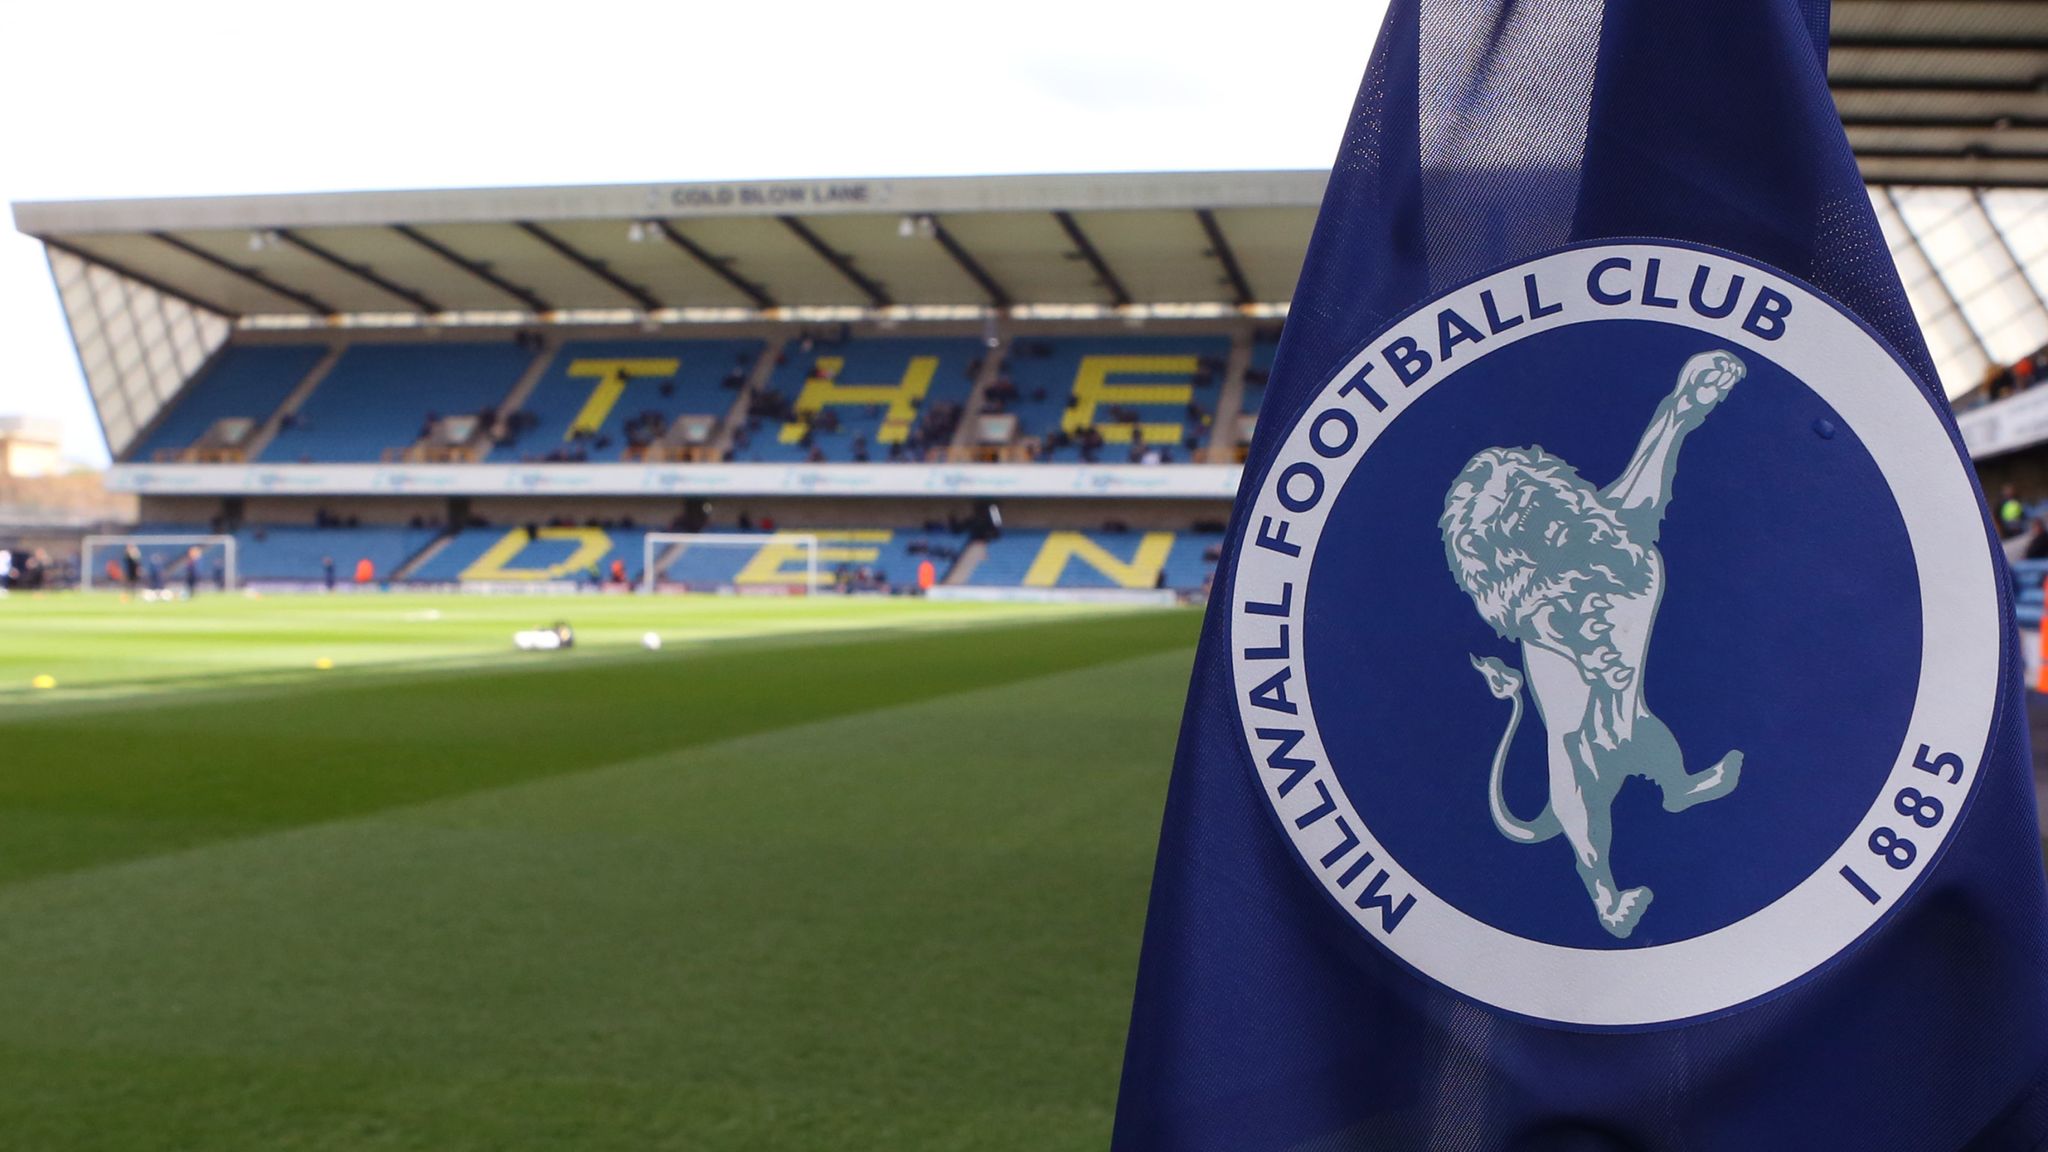 Millwall FC wins battle against developers, but they won't be the last  small club to face one 